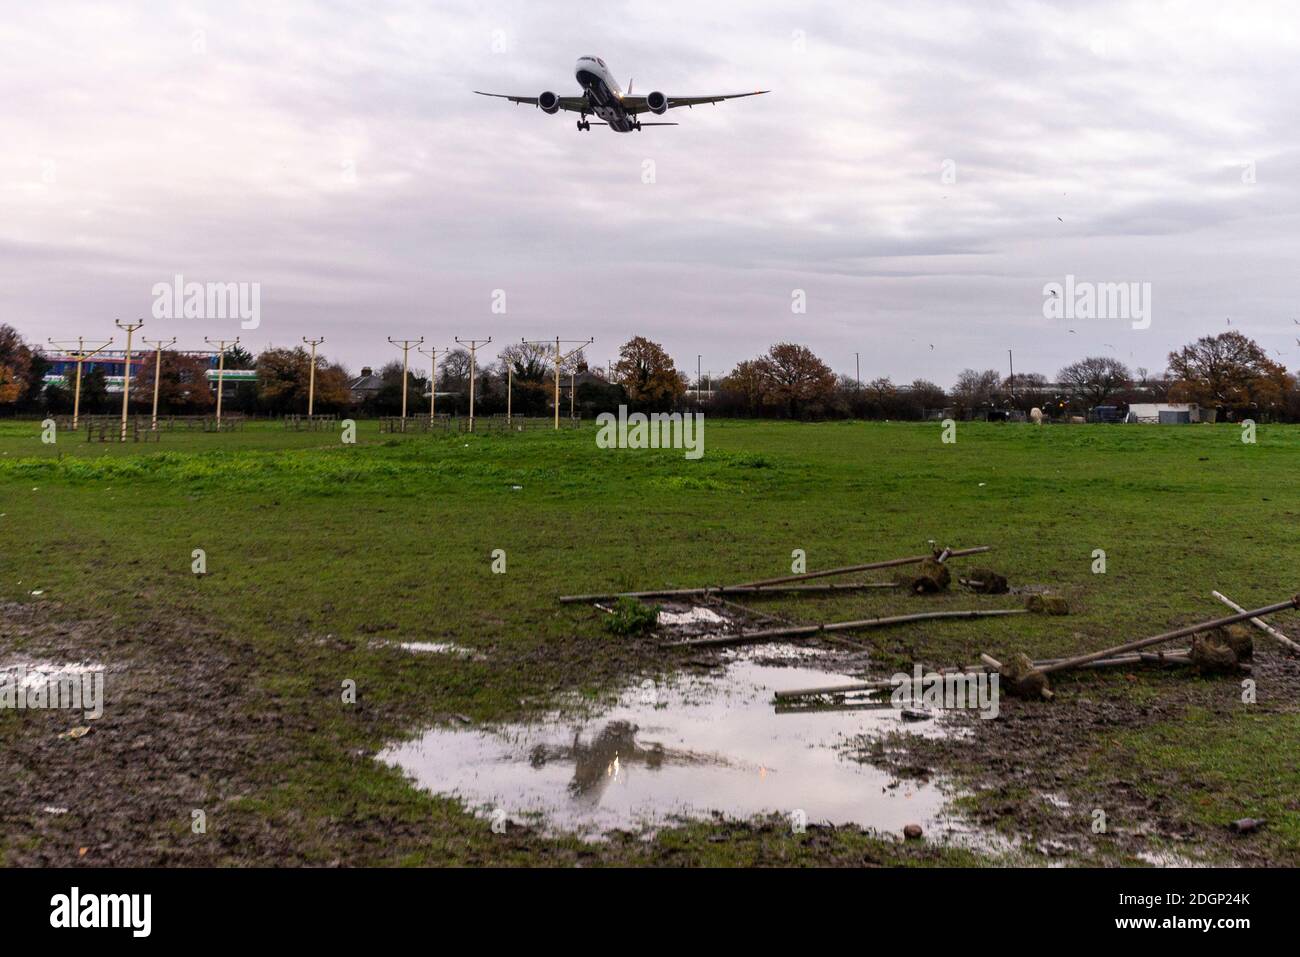 London Heathrow Airport, London, UK. 9th Dec, 2020. Overnight rain has cleared into a cloudy cool morning as the first arrivals land at Heathrow. The rain has left the ground sodden with puddles reflecting the landing aircraft Stock Photo